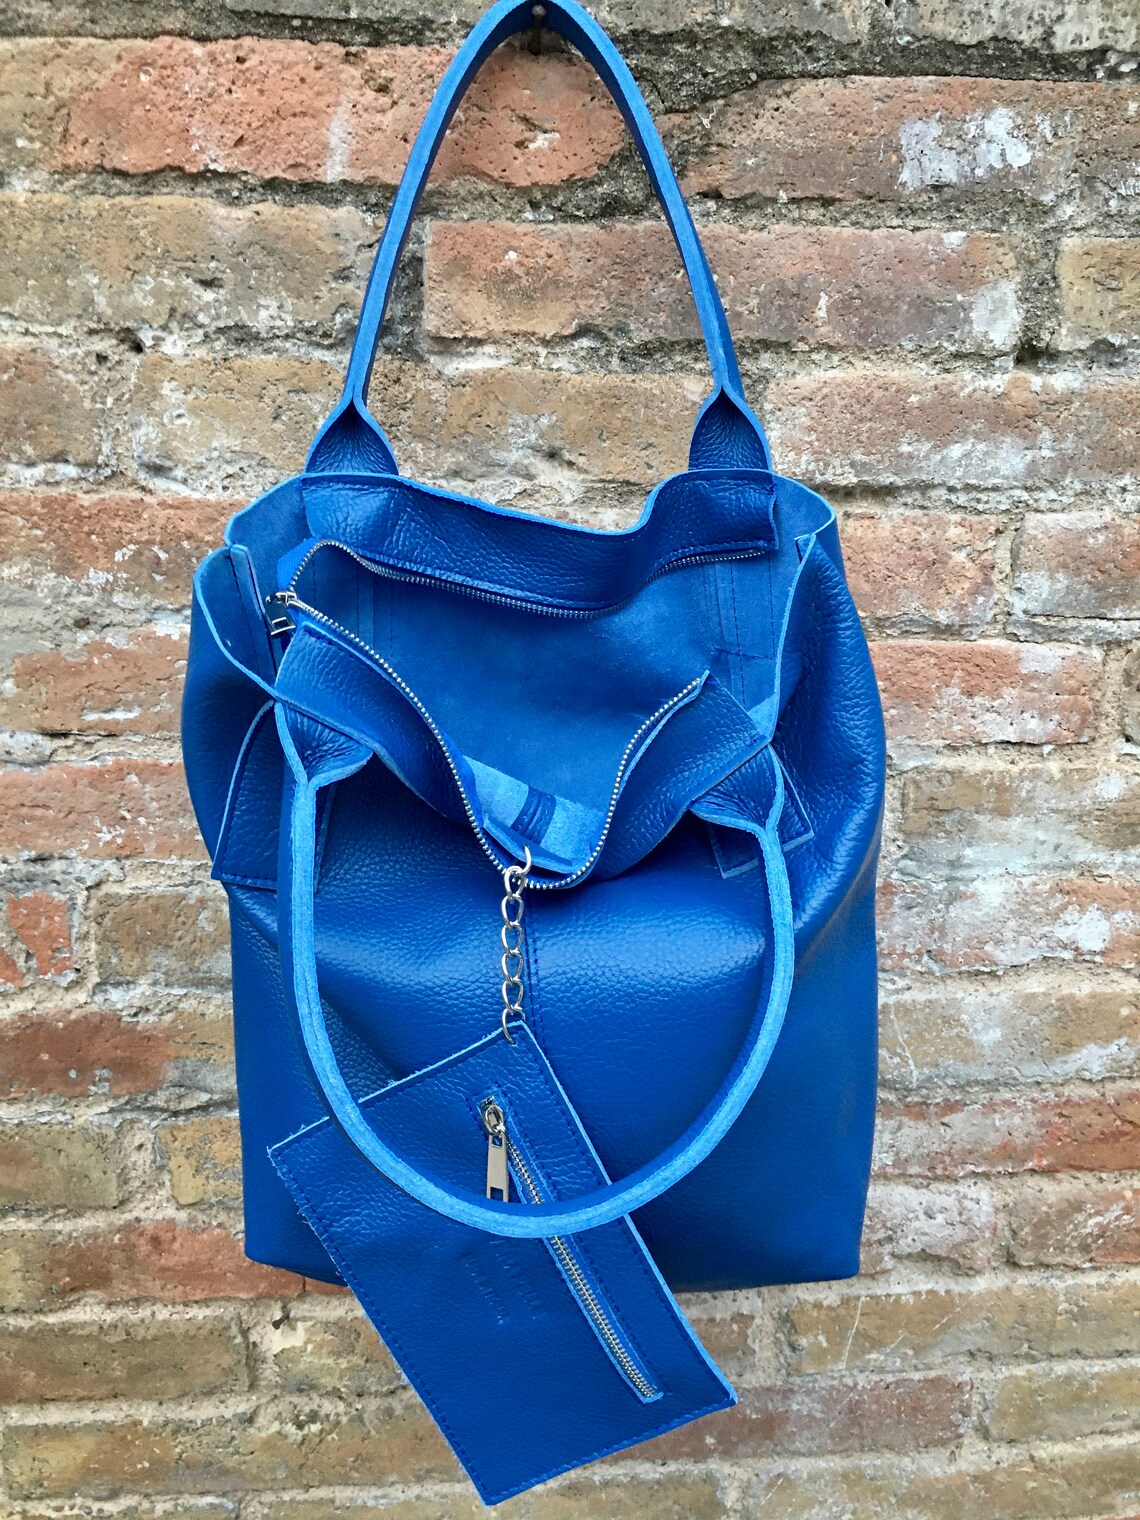 Tote Leather Bag in COBALT Blue. Leather Shopper in GENUINE | Etsy